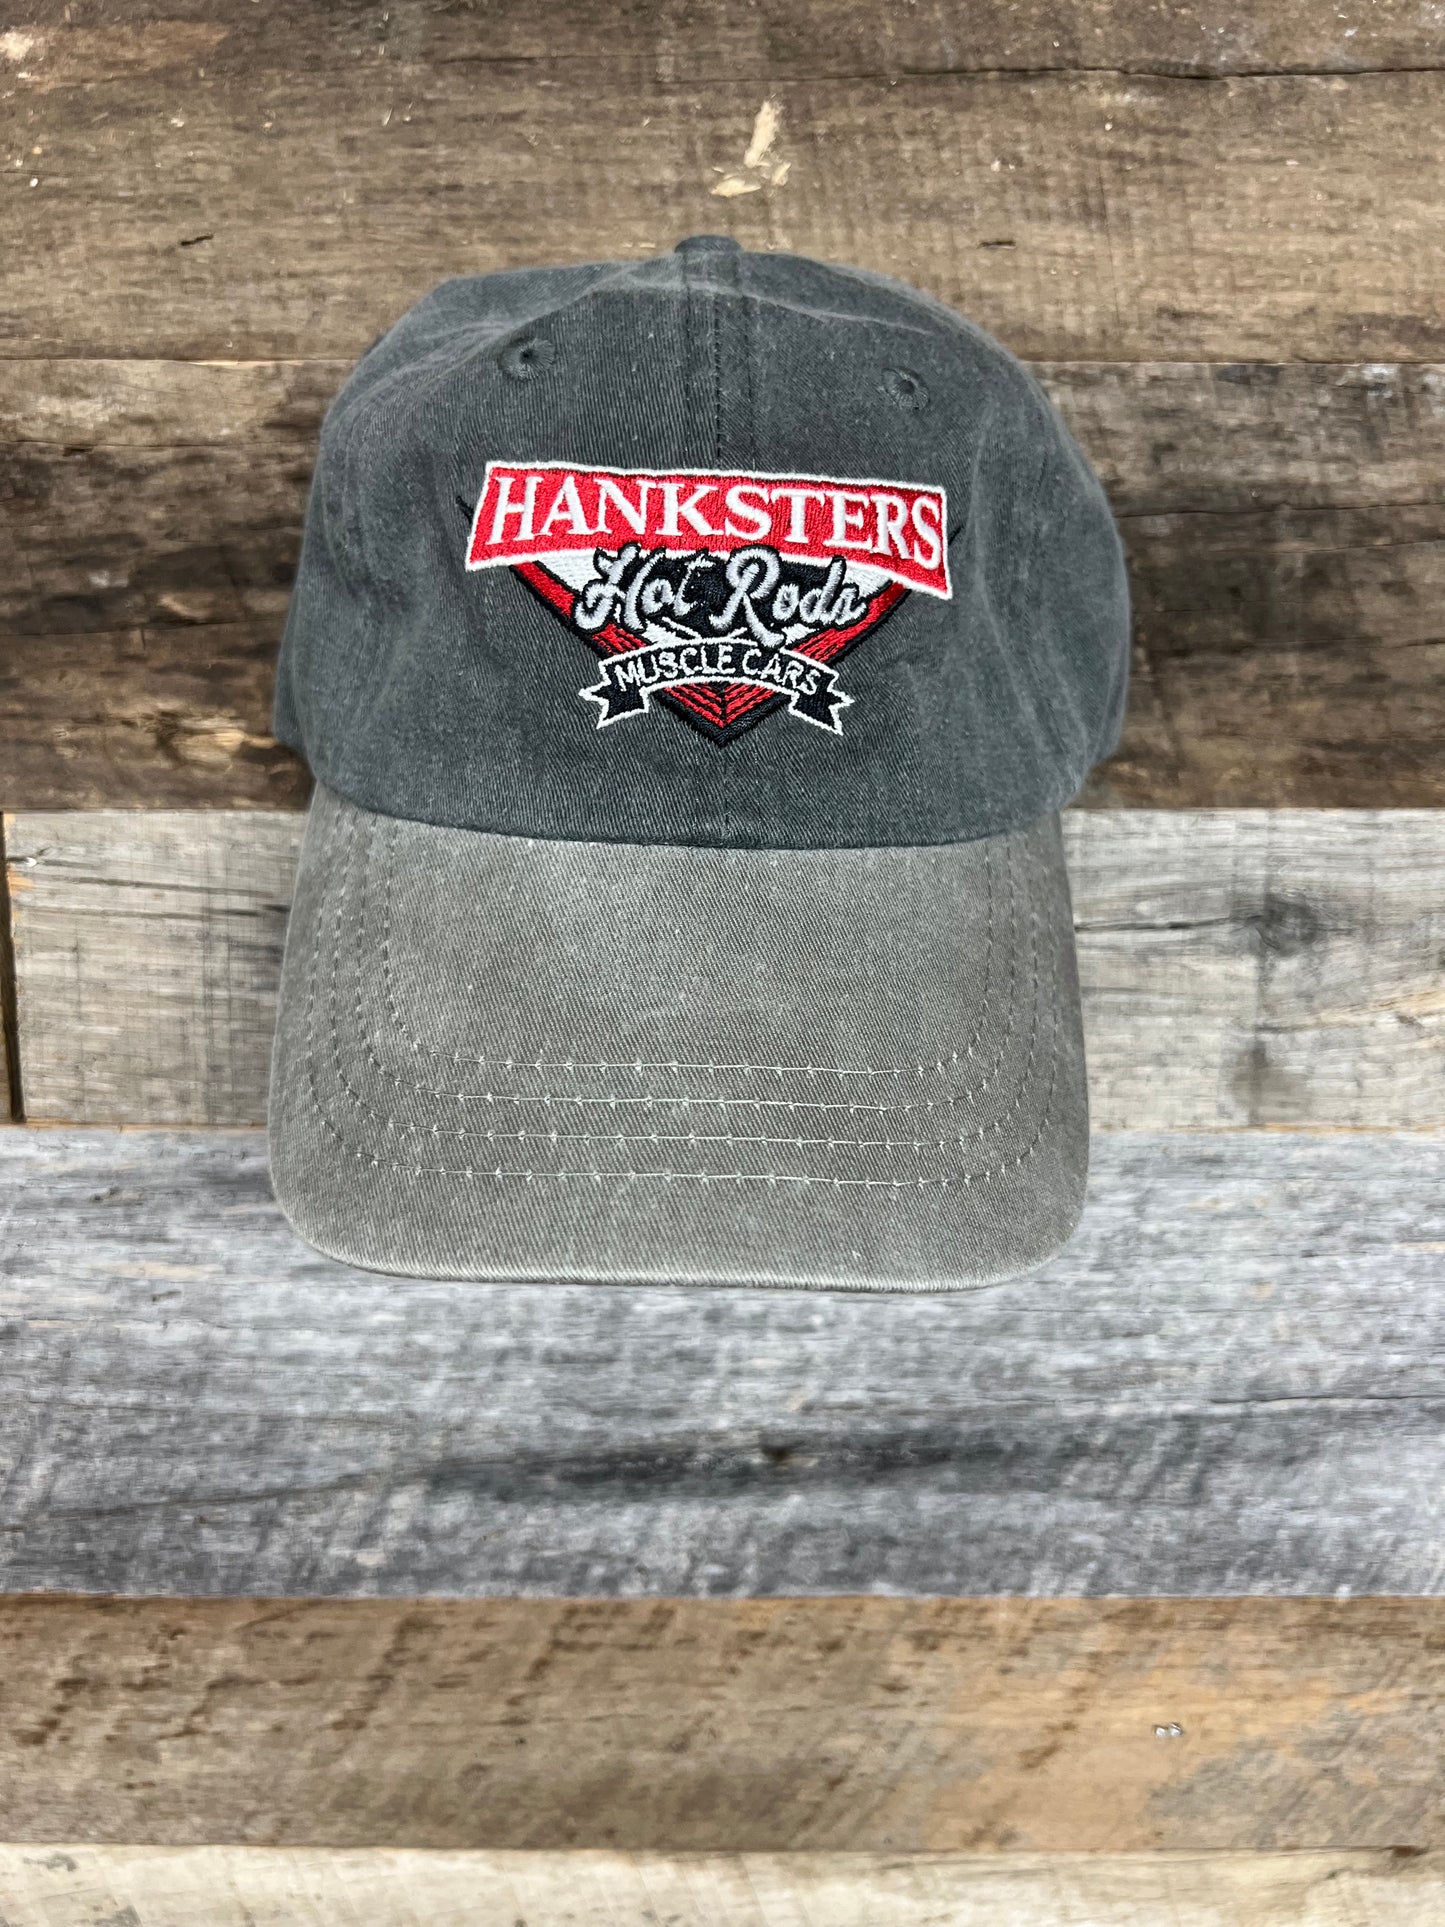 Hanksters light gray and Charcoal hat